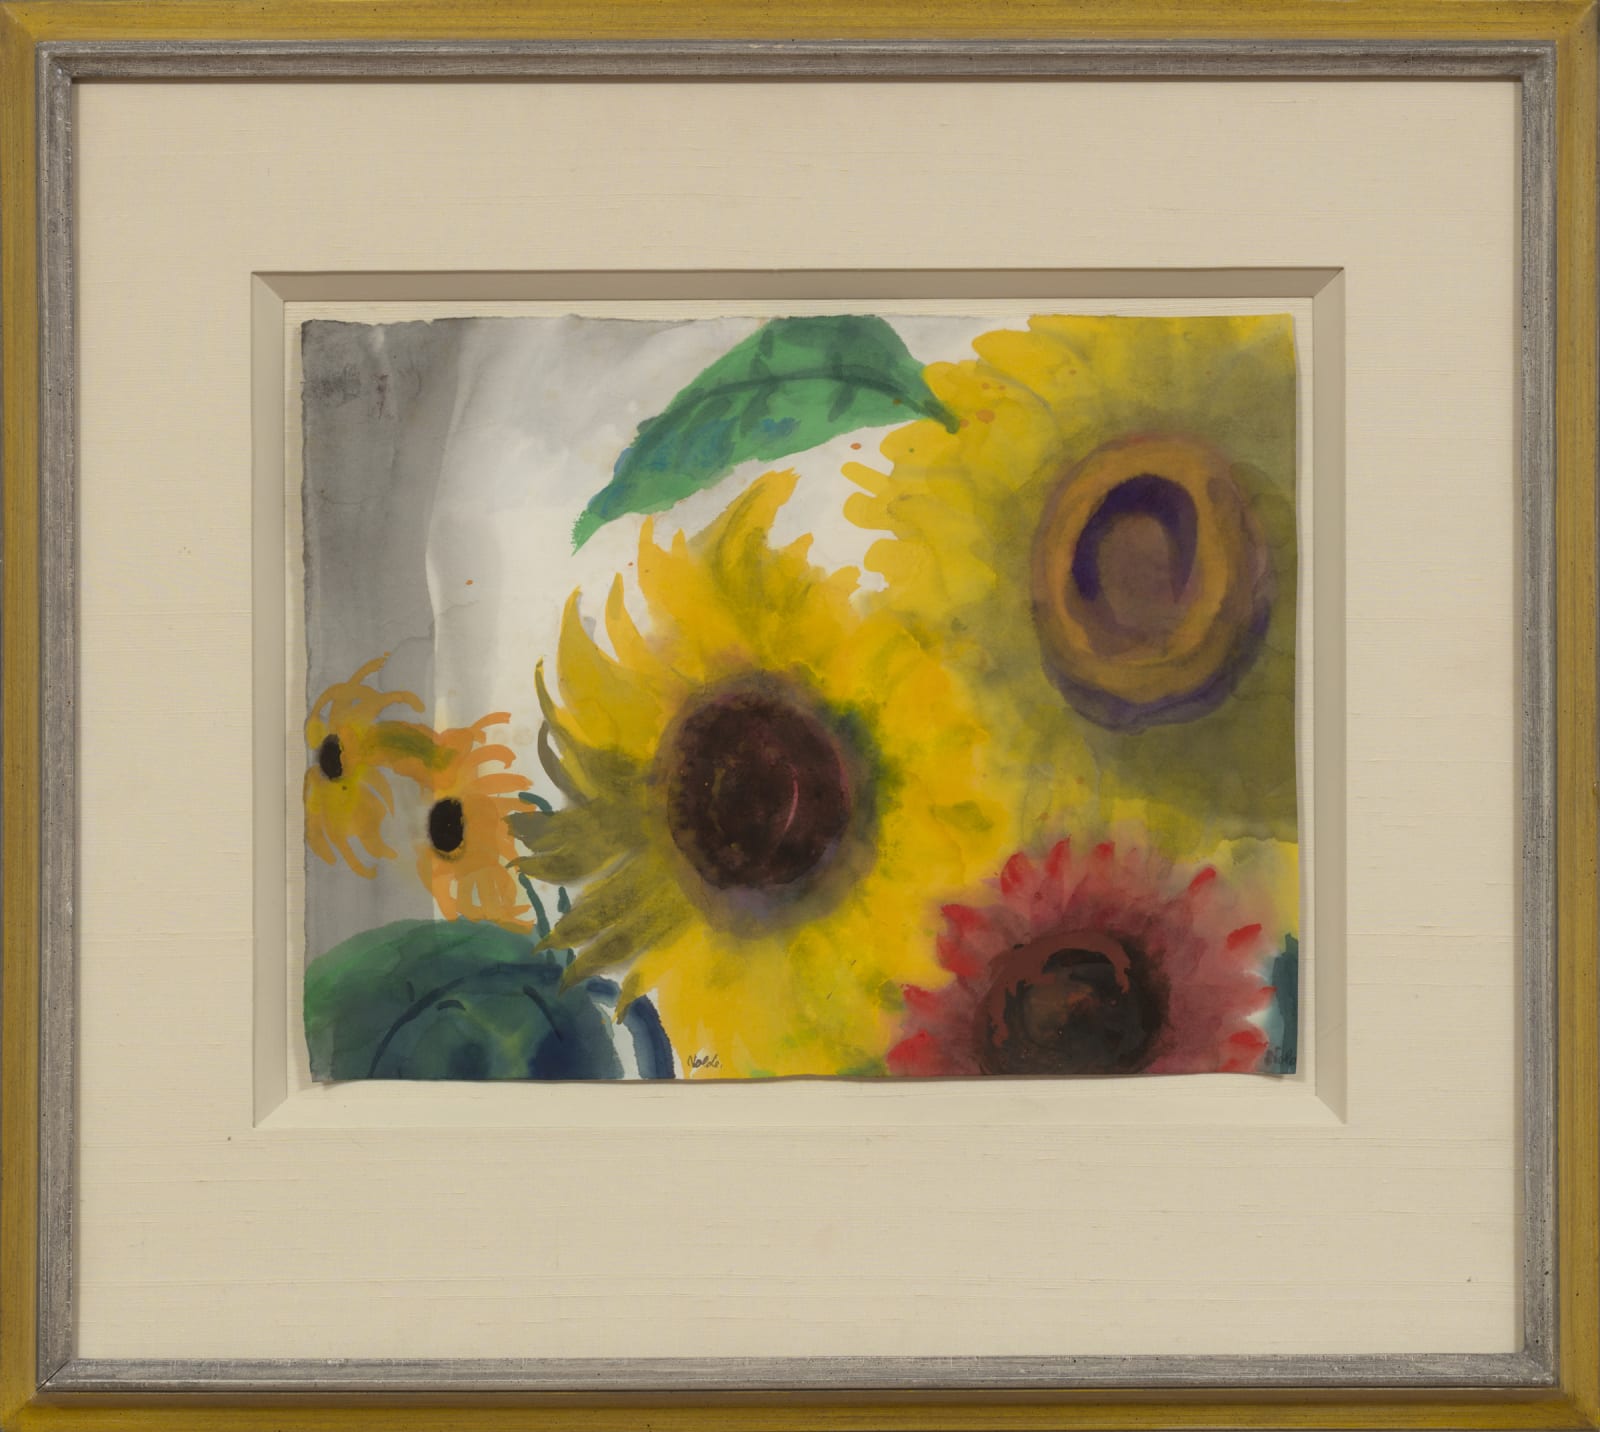 Emil Nolde, Yellow and Red Sunflowers, 1930-1940 'circa'